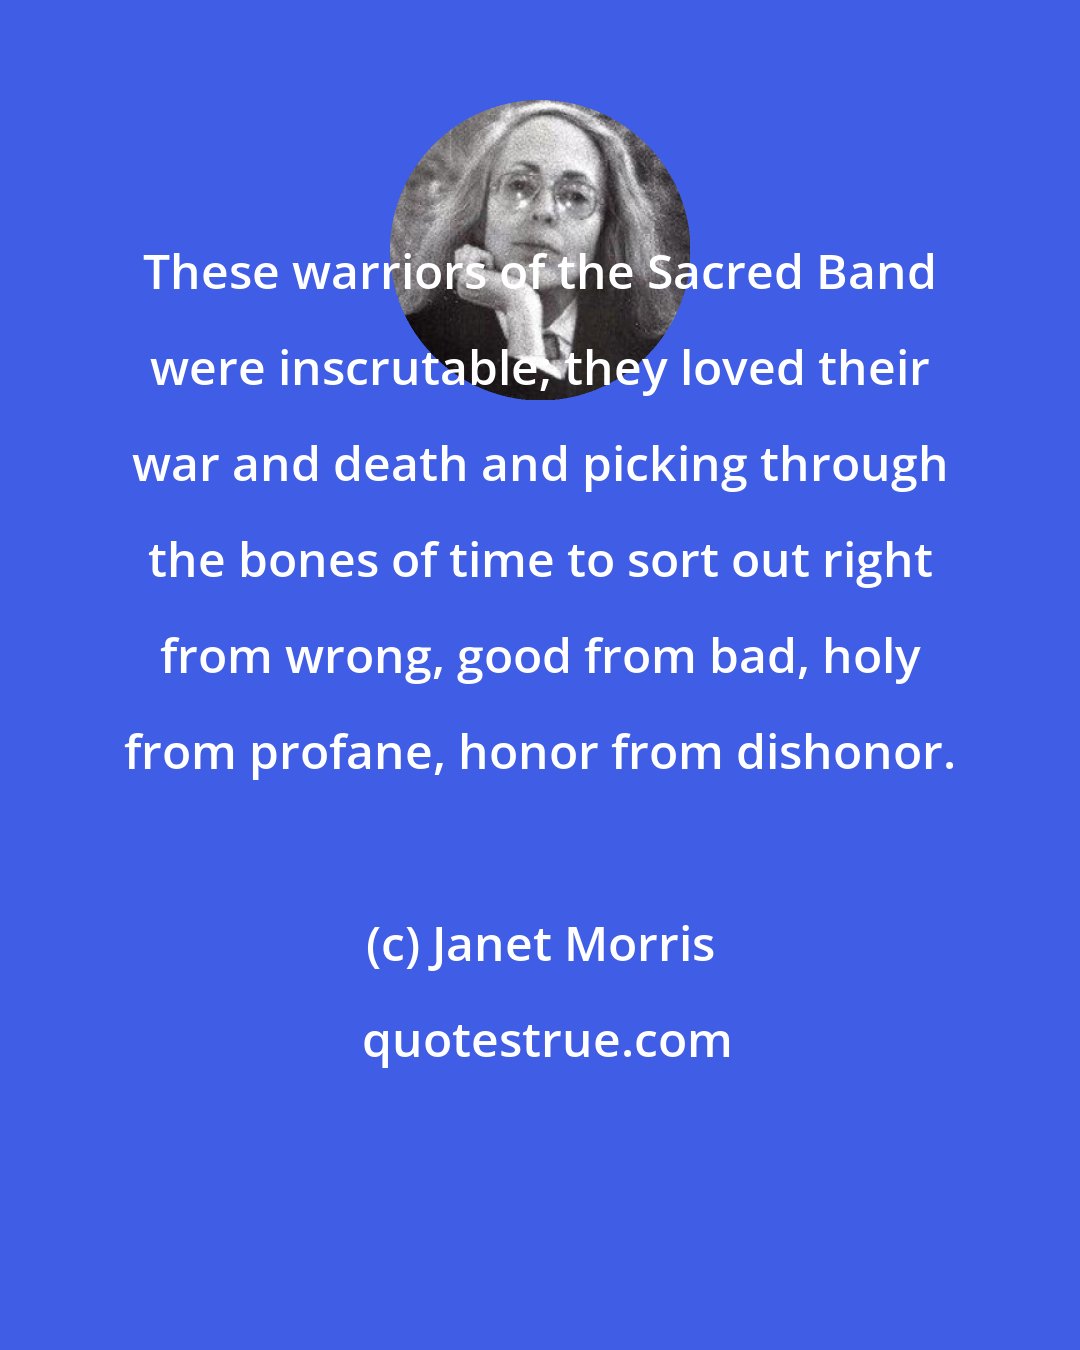 Janet Morris: These warriors of the Sacred Band were inscrutable; they loved their war and death and picking through the bones of time to sort out right from wrong, good from bad, holy from profane, honor from dishonor.